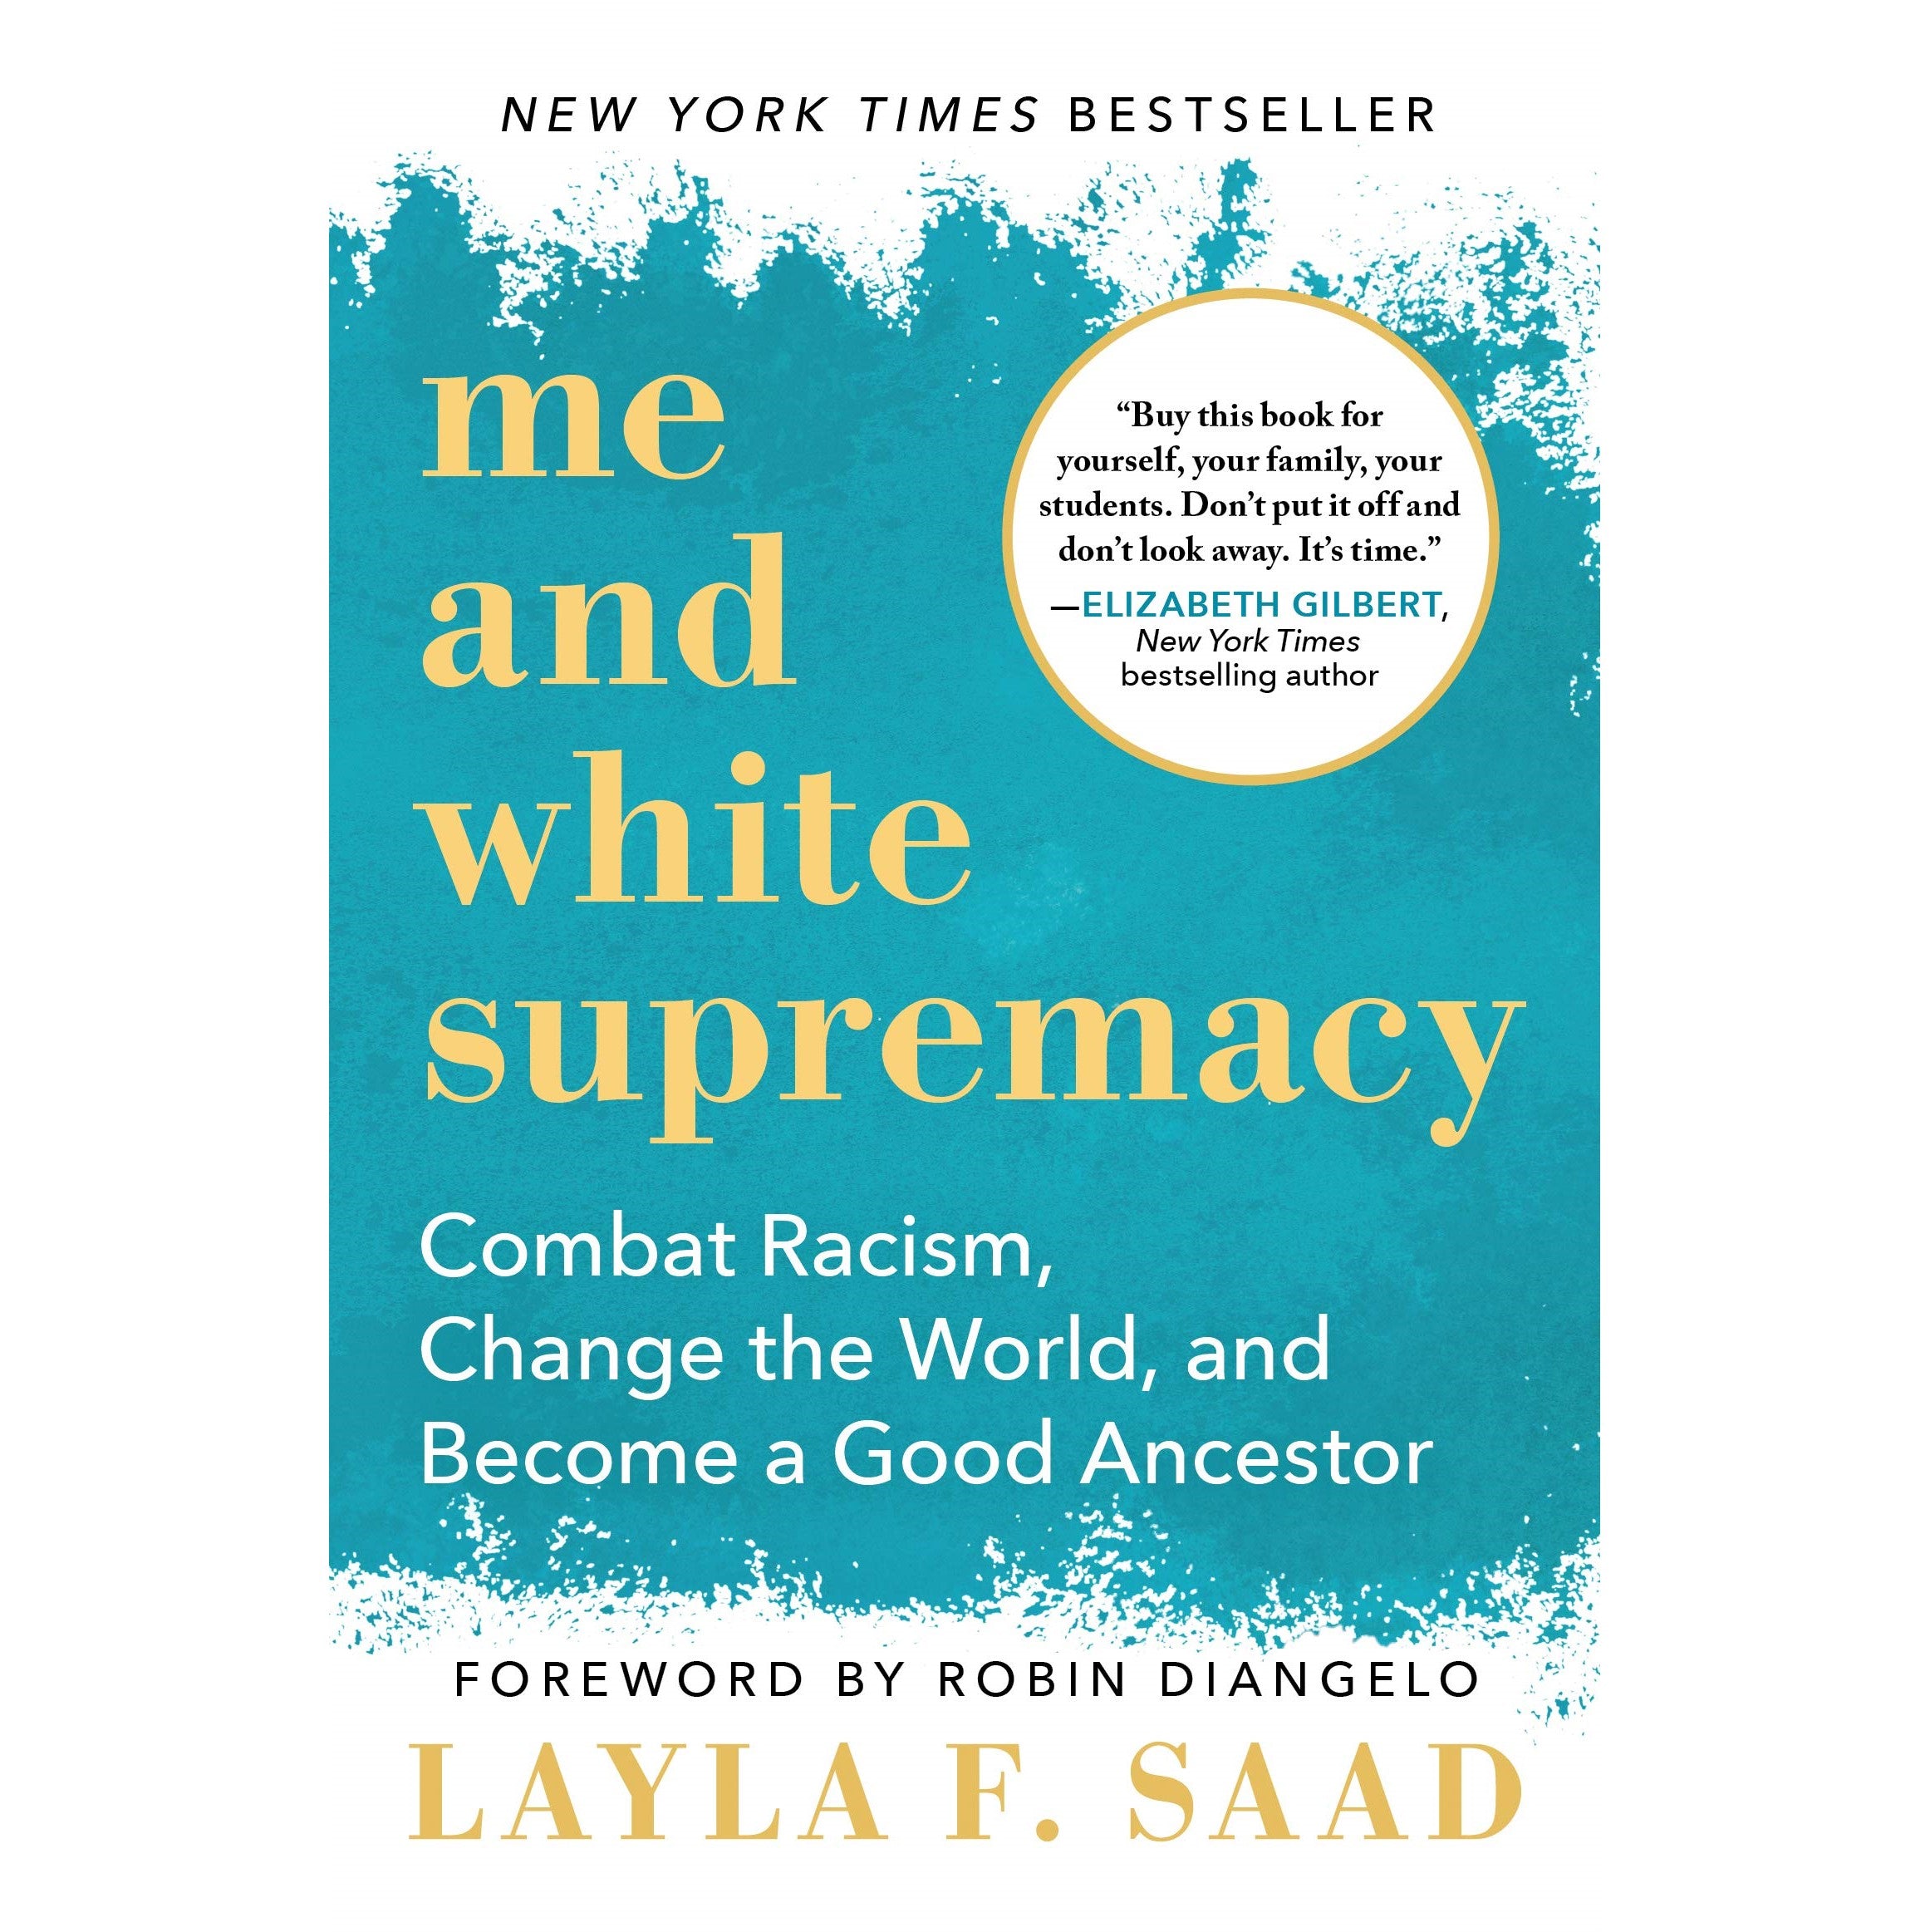 Me and White Supremacy: Combat Racism, Change the World, and Become a Good Ancestor (Hardcover) by Layla F. Saad